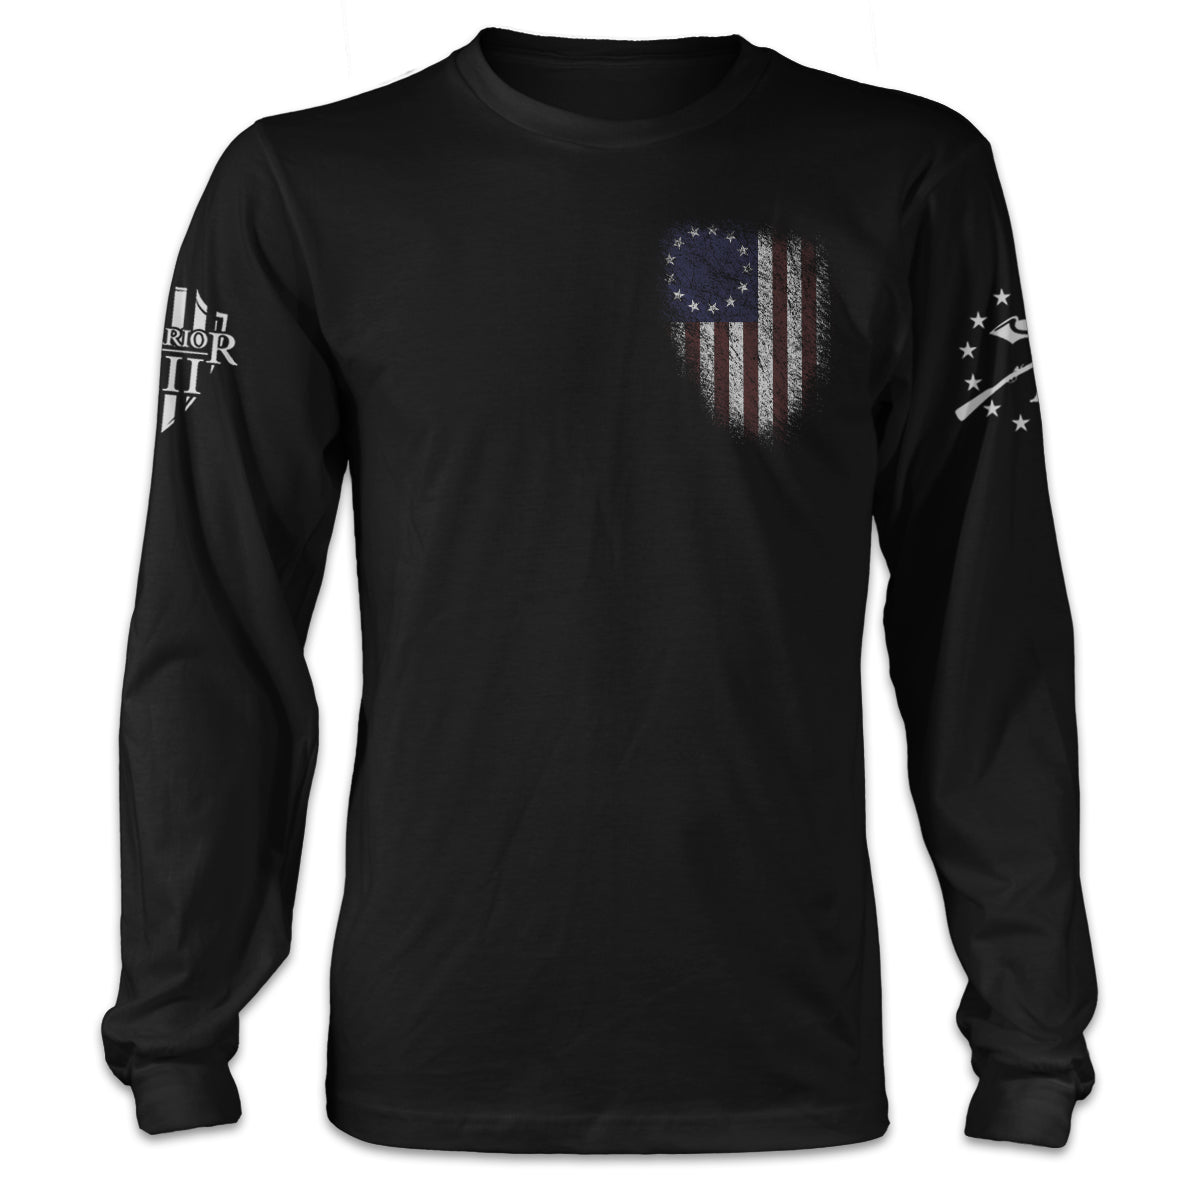 Black long sleeve shirt with the Betsy Ross flag emblem printed on the front.